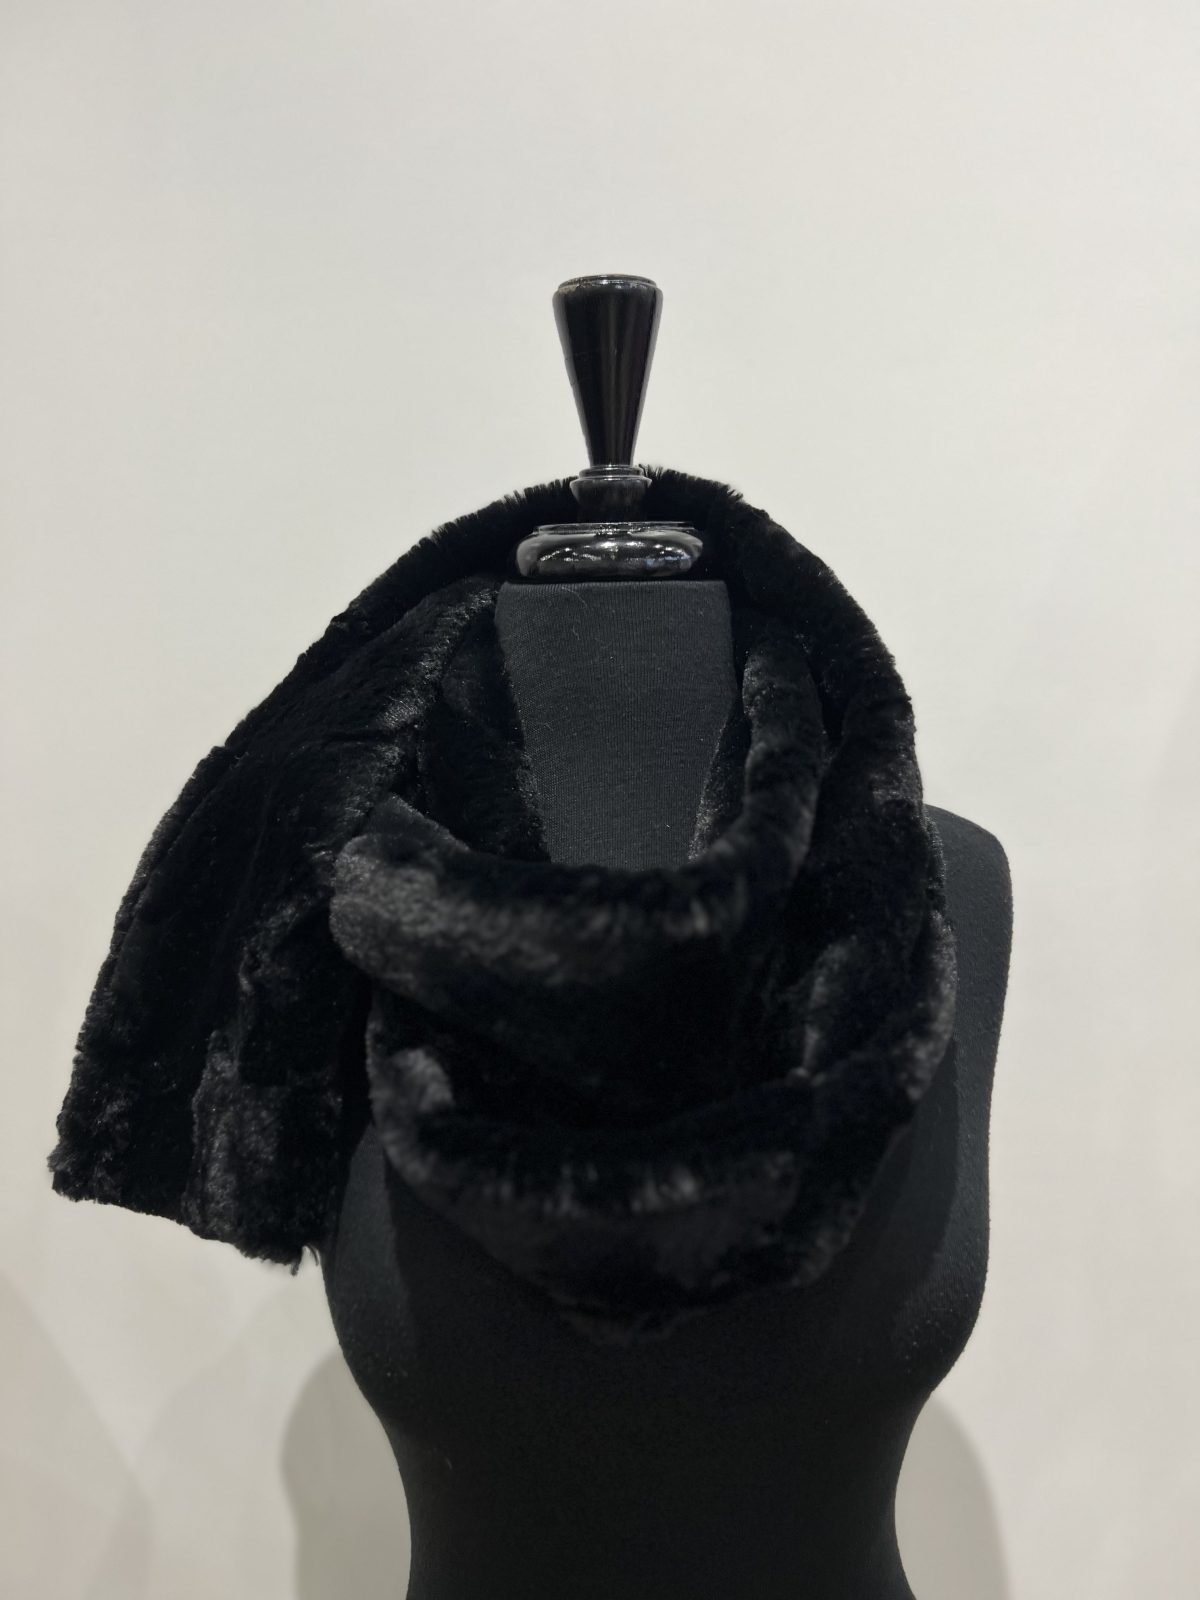 Vine Street 107 Black Faux Fur Scarf | Ooh Ooh Shoes women's clothing and shoe boutique located in Naples and Mashpee